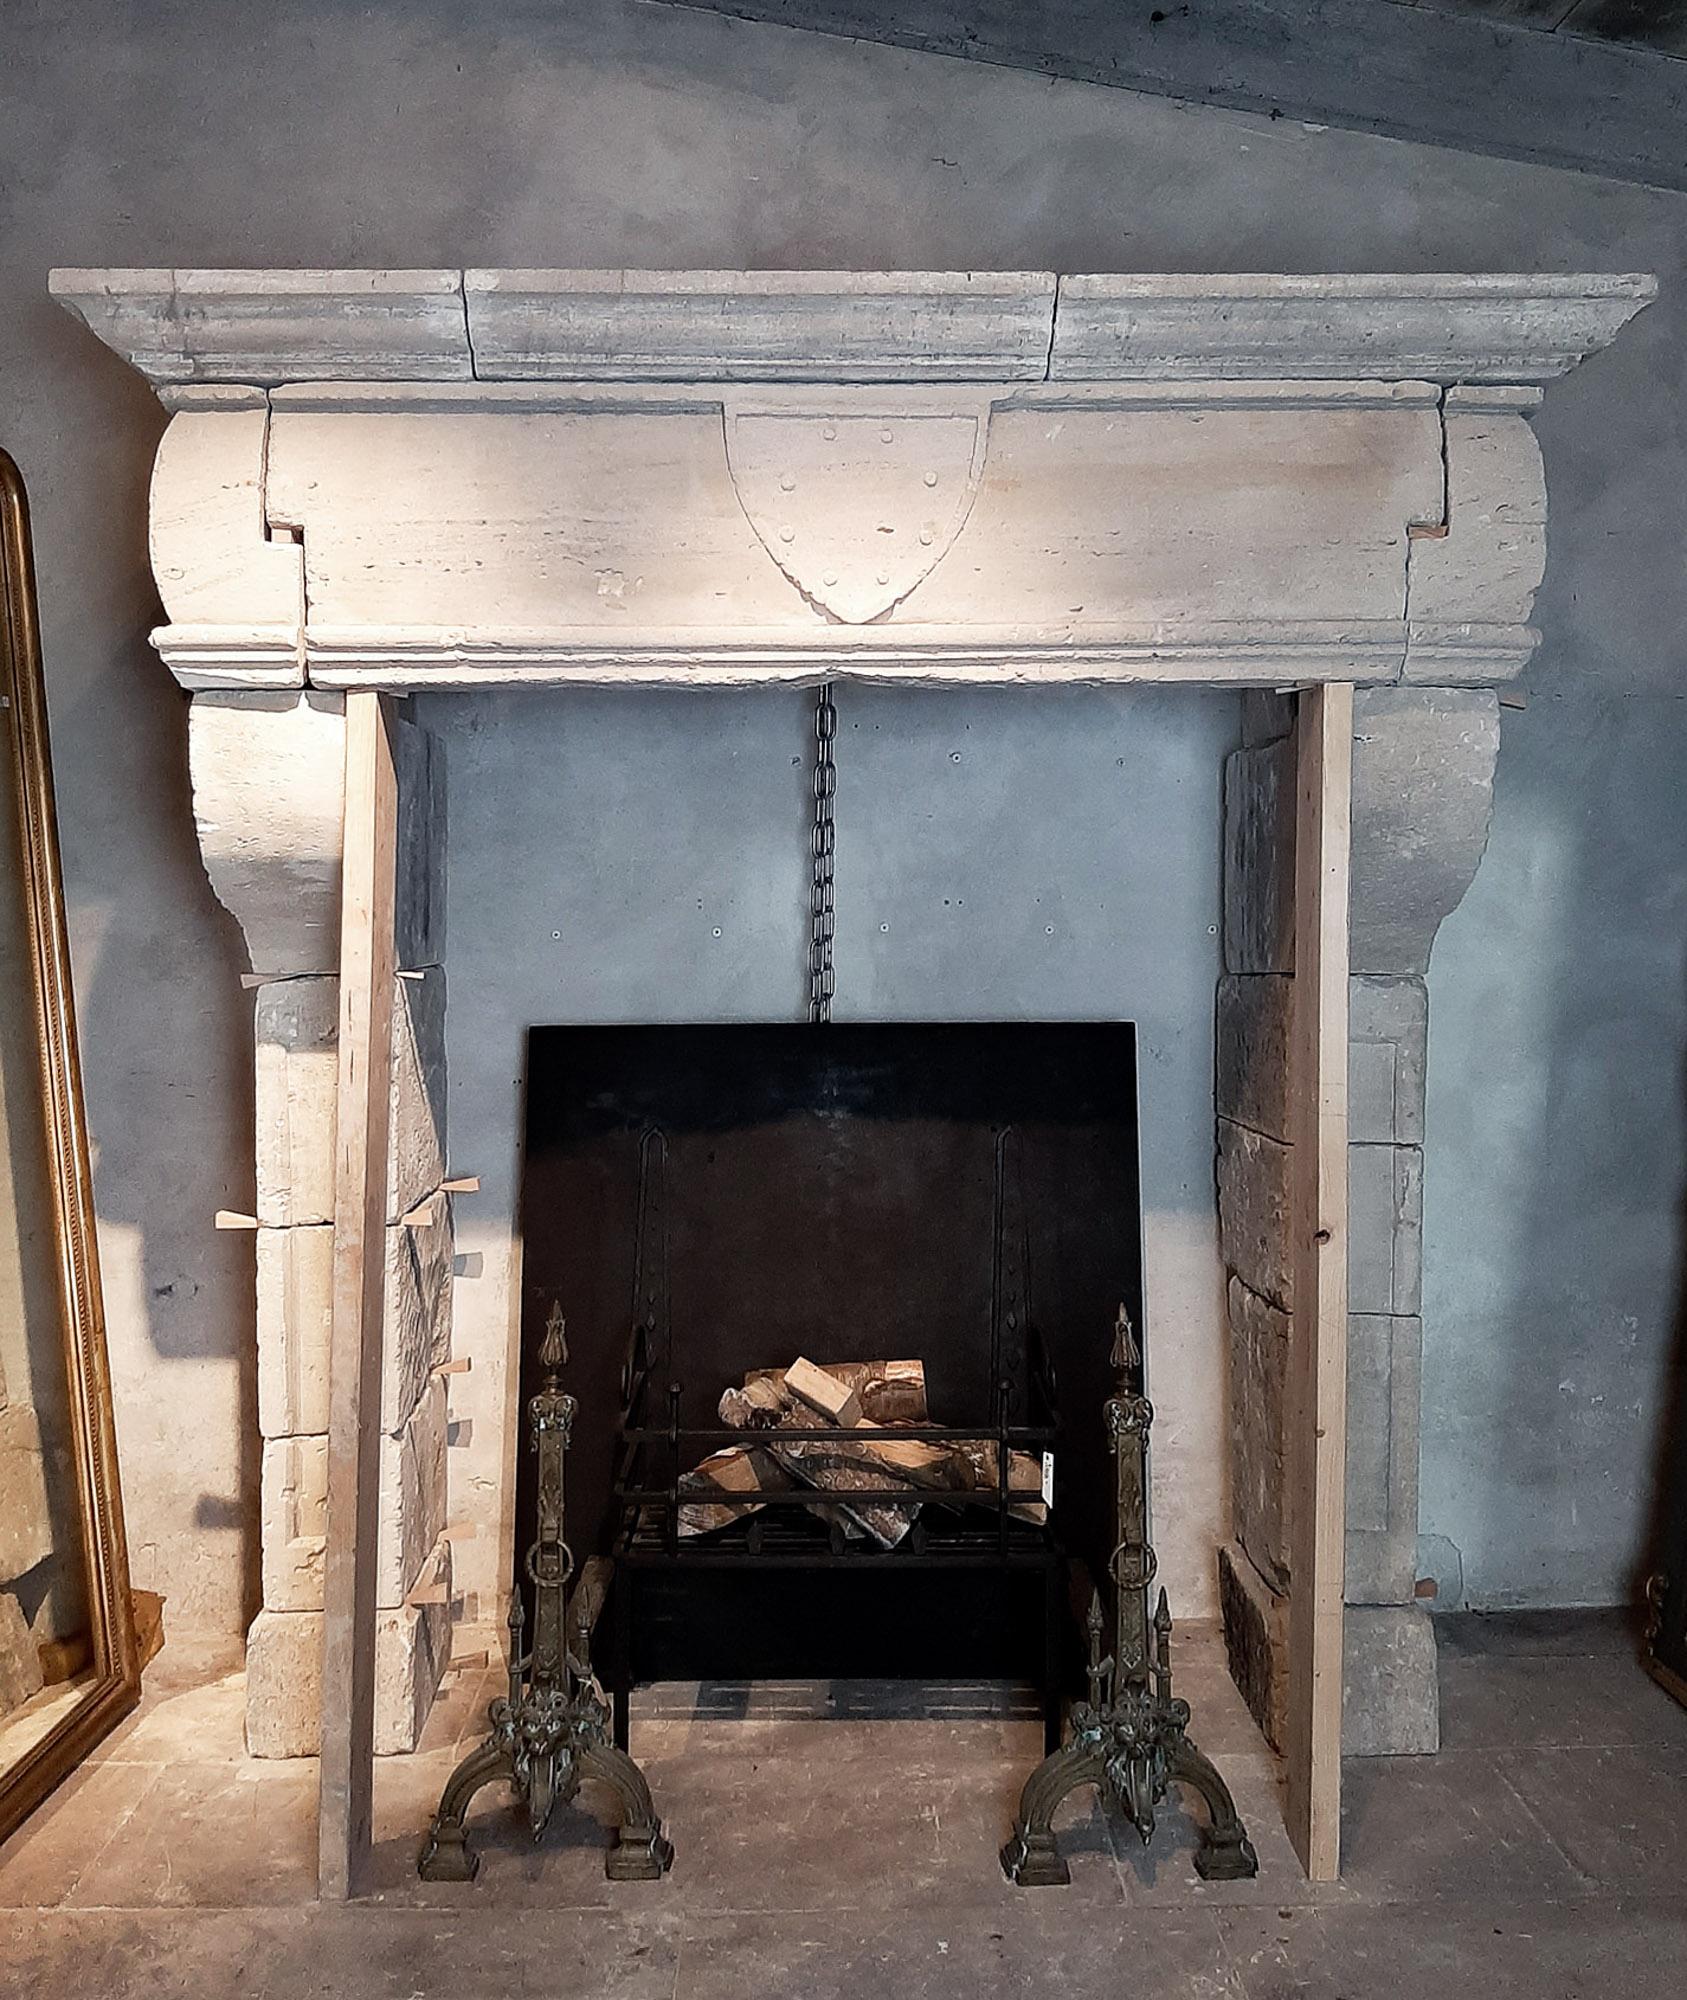 Stunning Antique 17th Century Mantelpiece, a timeless limestone fireplace from France. Featuring a central cartouche with a coat of arms, this piece adds historical charm to any space.  Its simple yet elegant design captures the essence of French